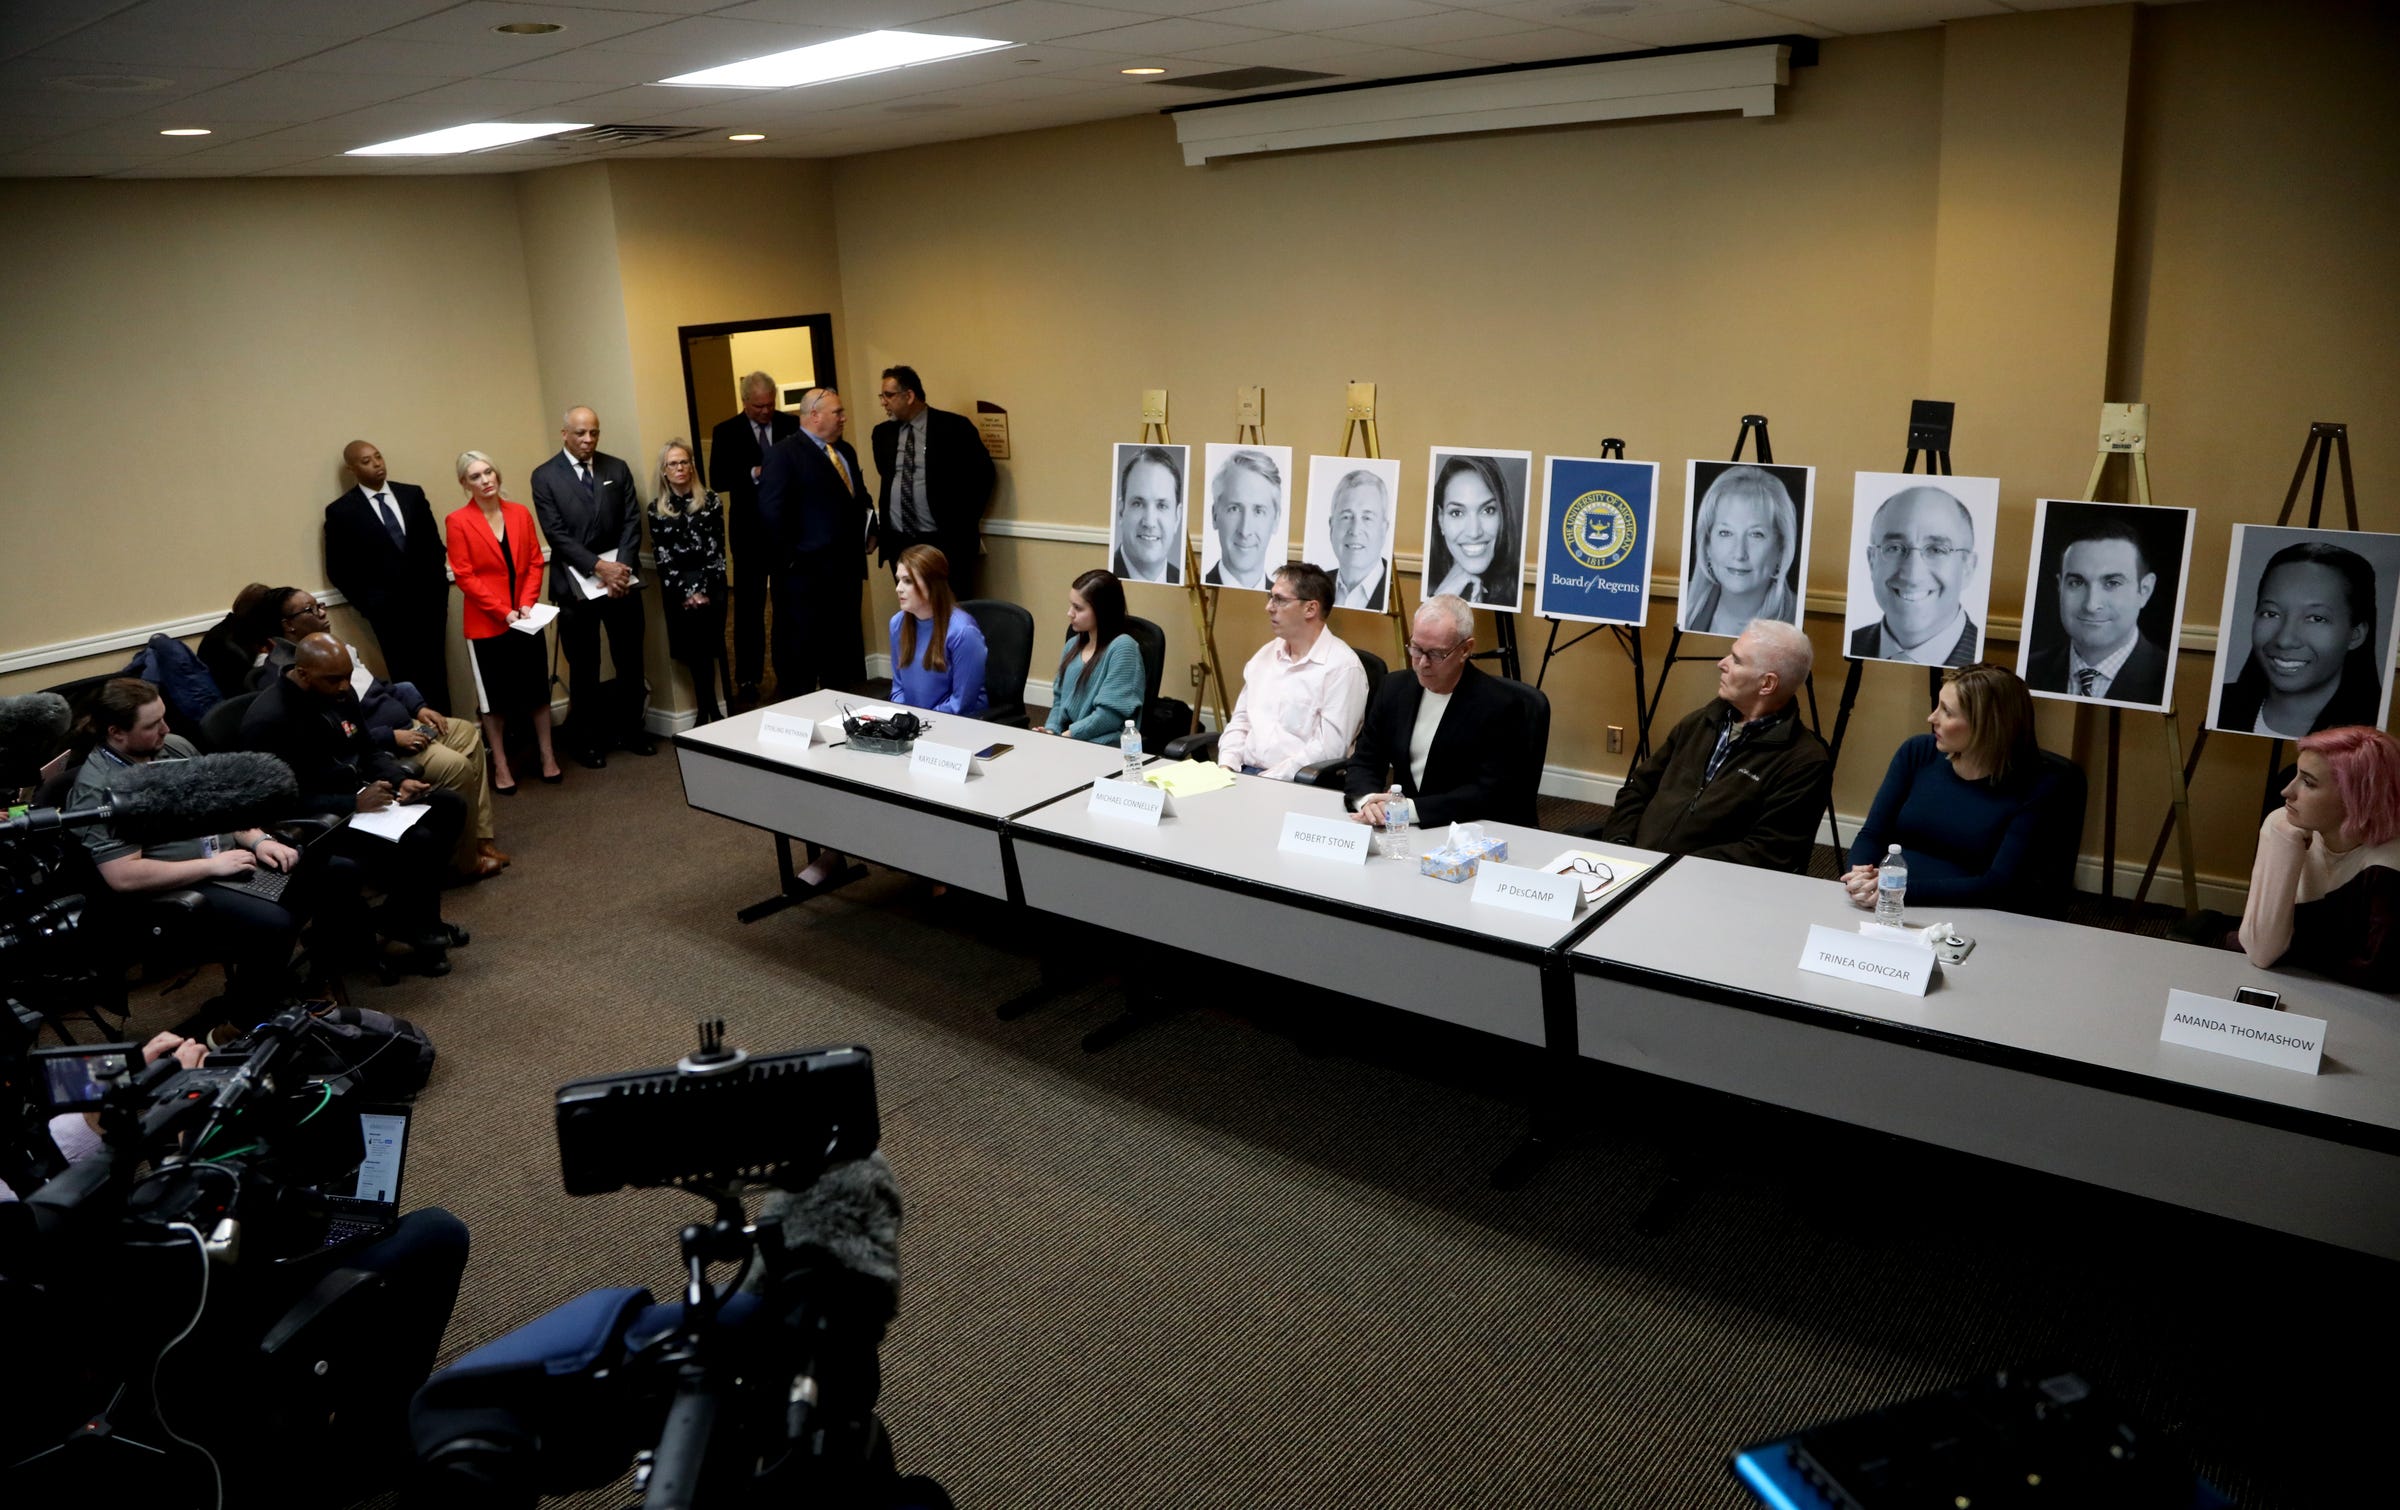 PHOTO: Victims of Larry Nasser and of Dr. Robert Anderson at the University of Michigan speak during a press conference at the Ann Arbor Marriott Ypsilanti at Eagle Creek in Ypsilanti, Mich., March 5, 2020.